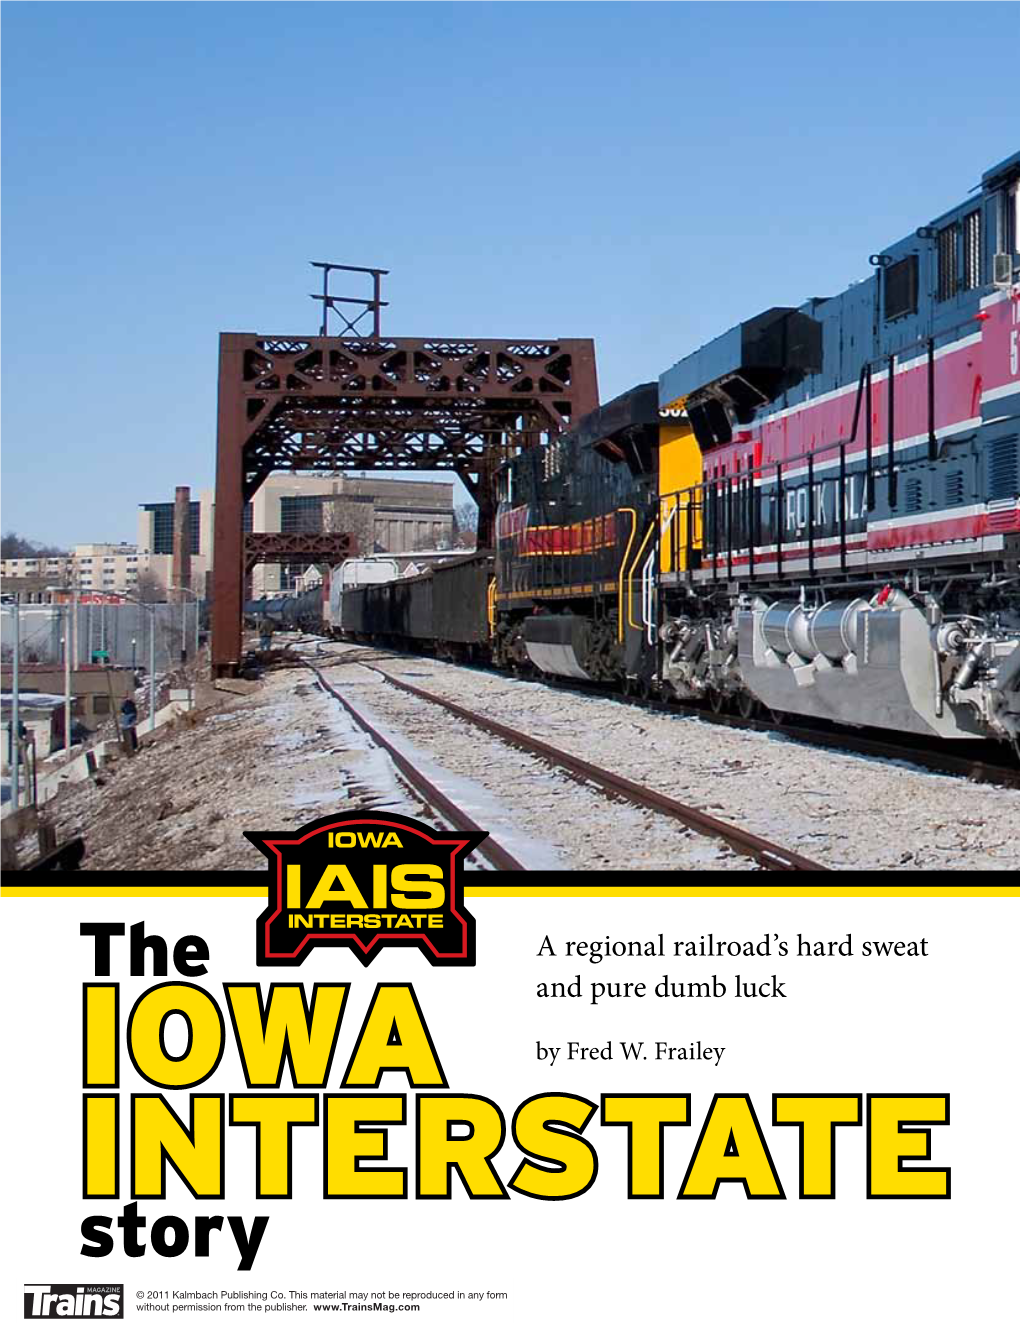 The Iowa Interstate Story, to This by 2015, You Might Even See Twice-Daily with 137 Cars Weighing 17,600 Tons